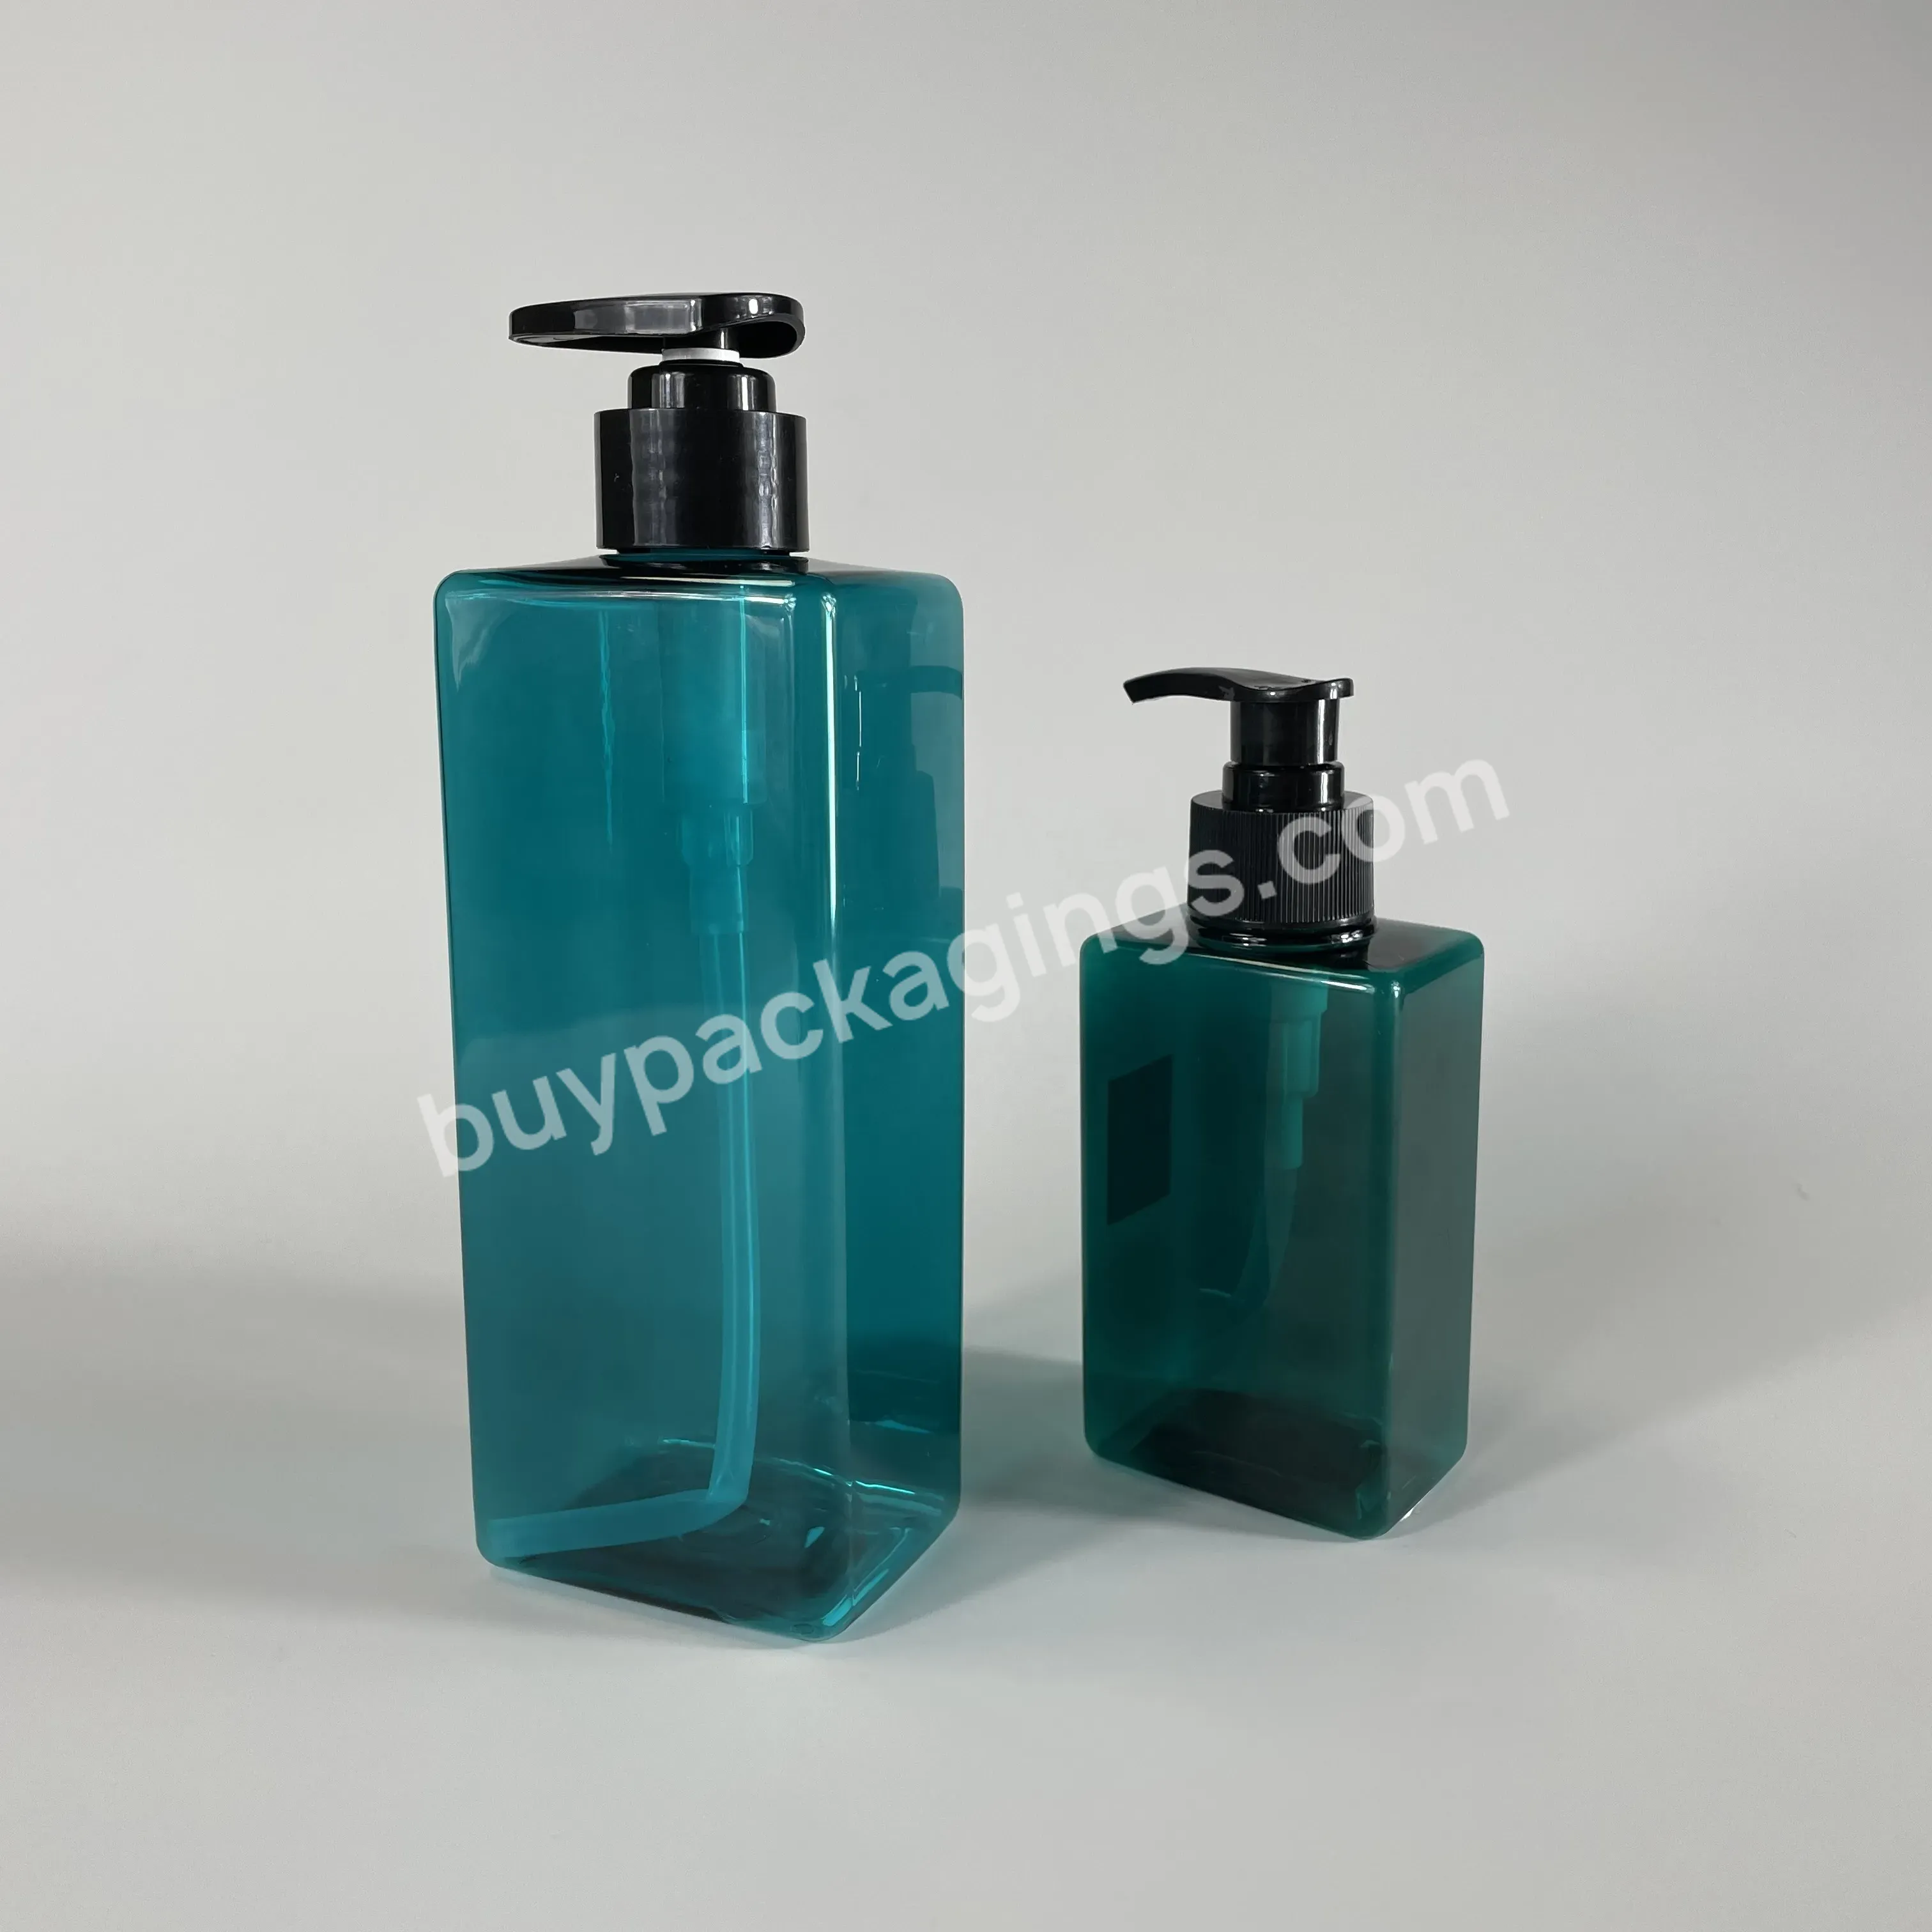 Luxury Plastic Hand Wash Bottle With Lotion Pump Green Square Plastic Shampoo Bottle - Buy Shampoo Bottle,200ml 500ml Luxury Plastic Hand Wash Bottle With Lotion Pump Green Square Plastic Shampoo Bottle,Square Plastic Shampoo Bottle.